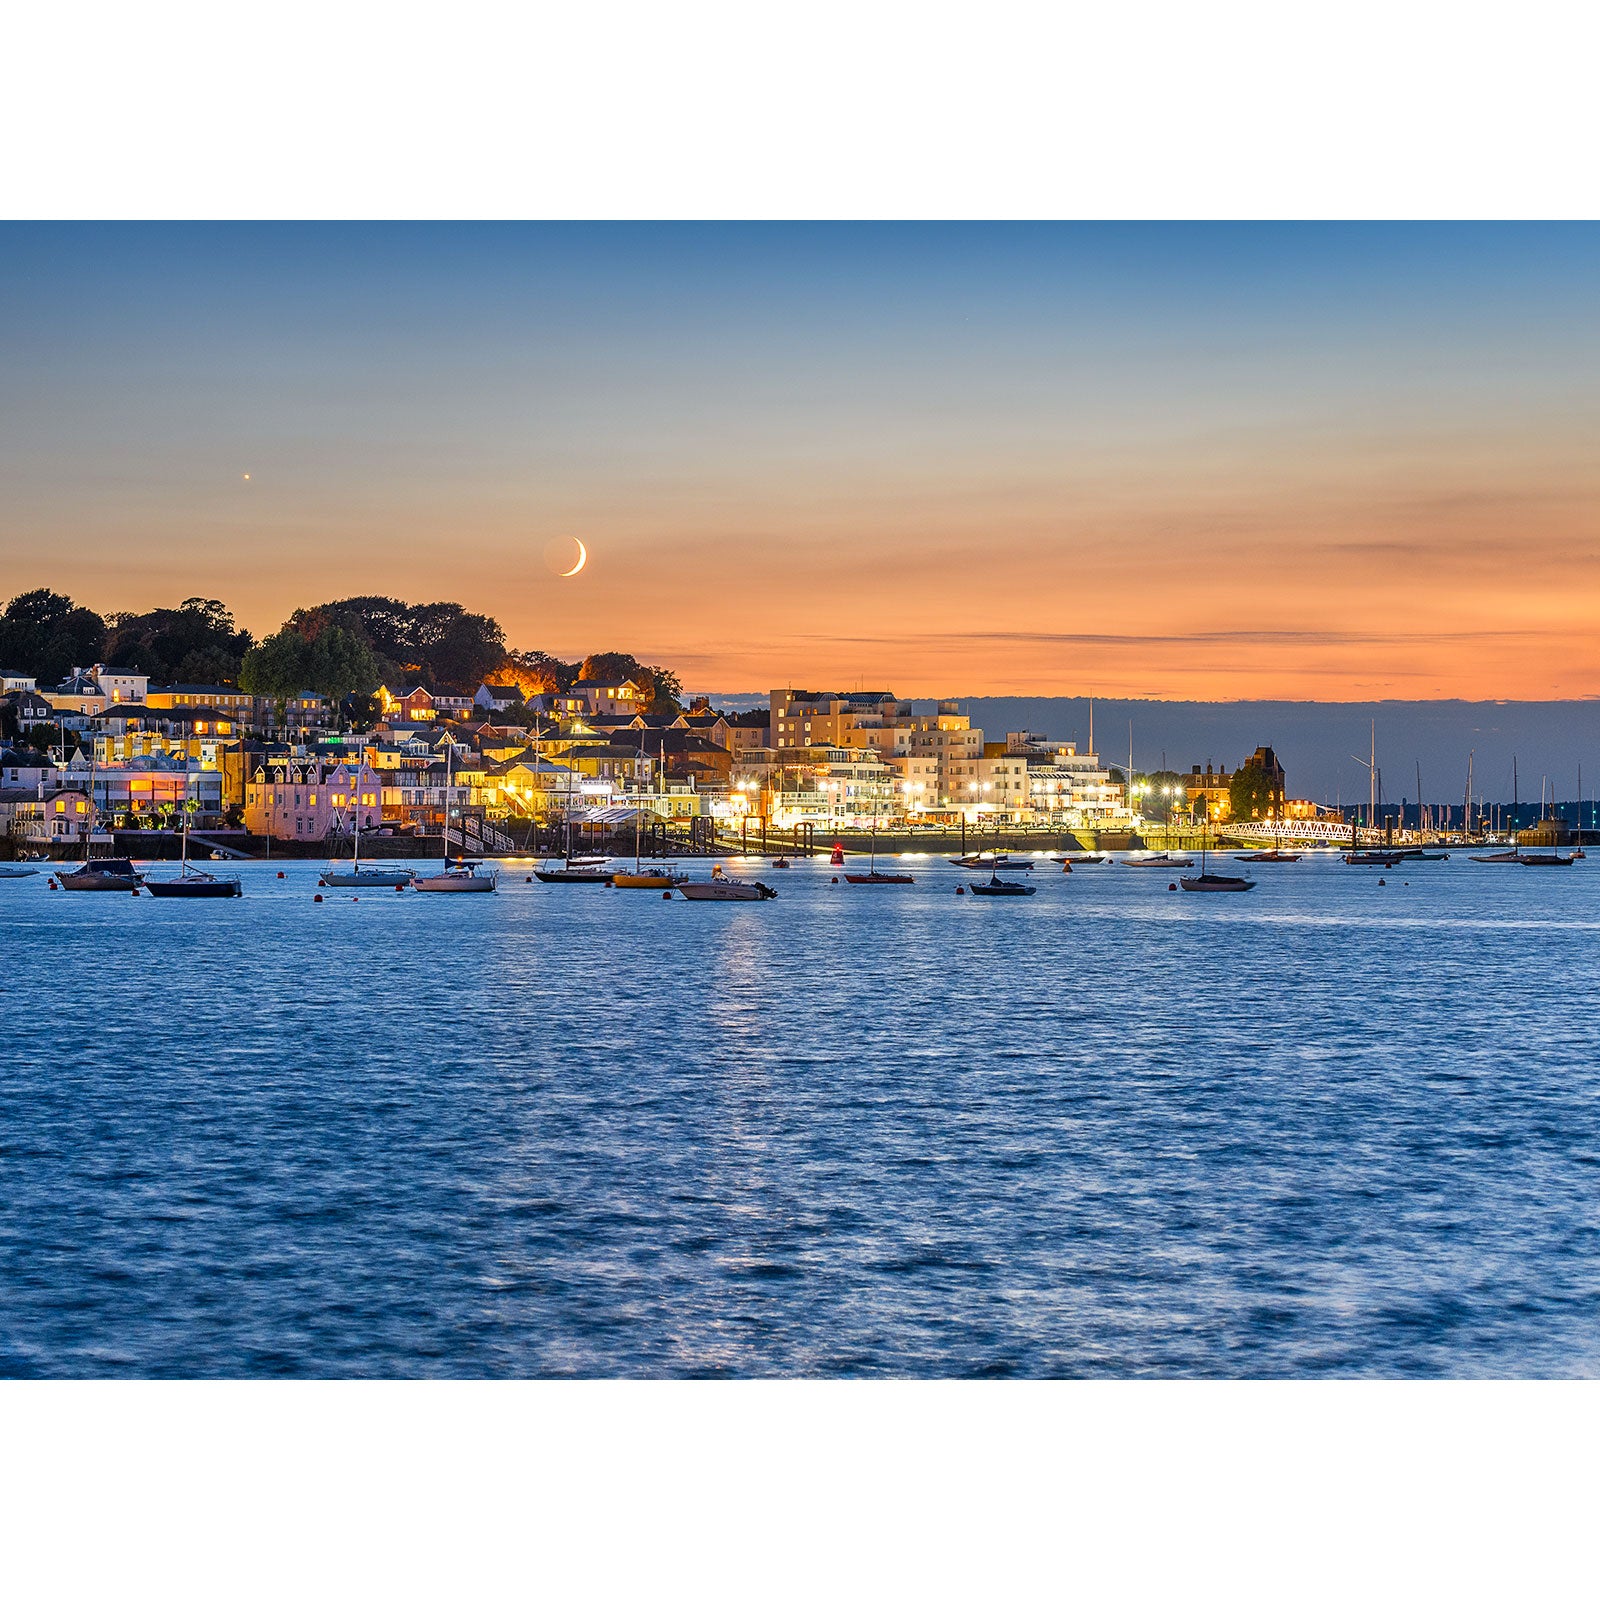 Twilight over a coastal town on the Isle of Wight with "Crescent Moon over Cowes" above, lights reflecting on water. Created by Available Light Photography.